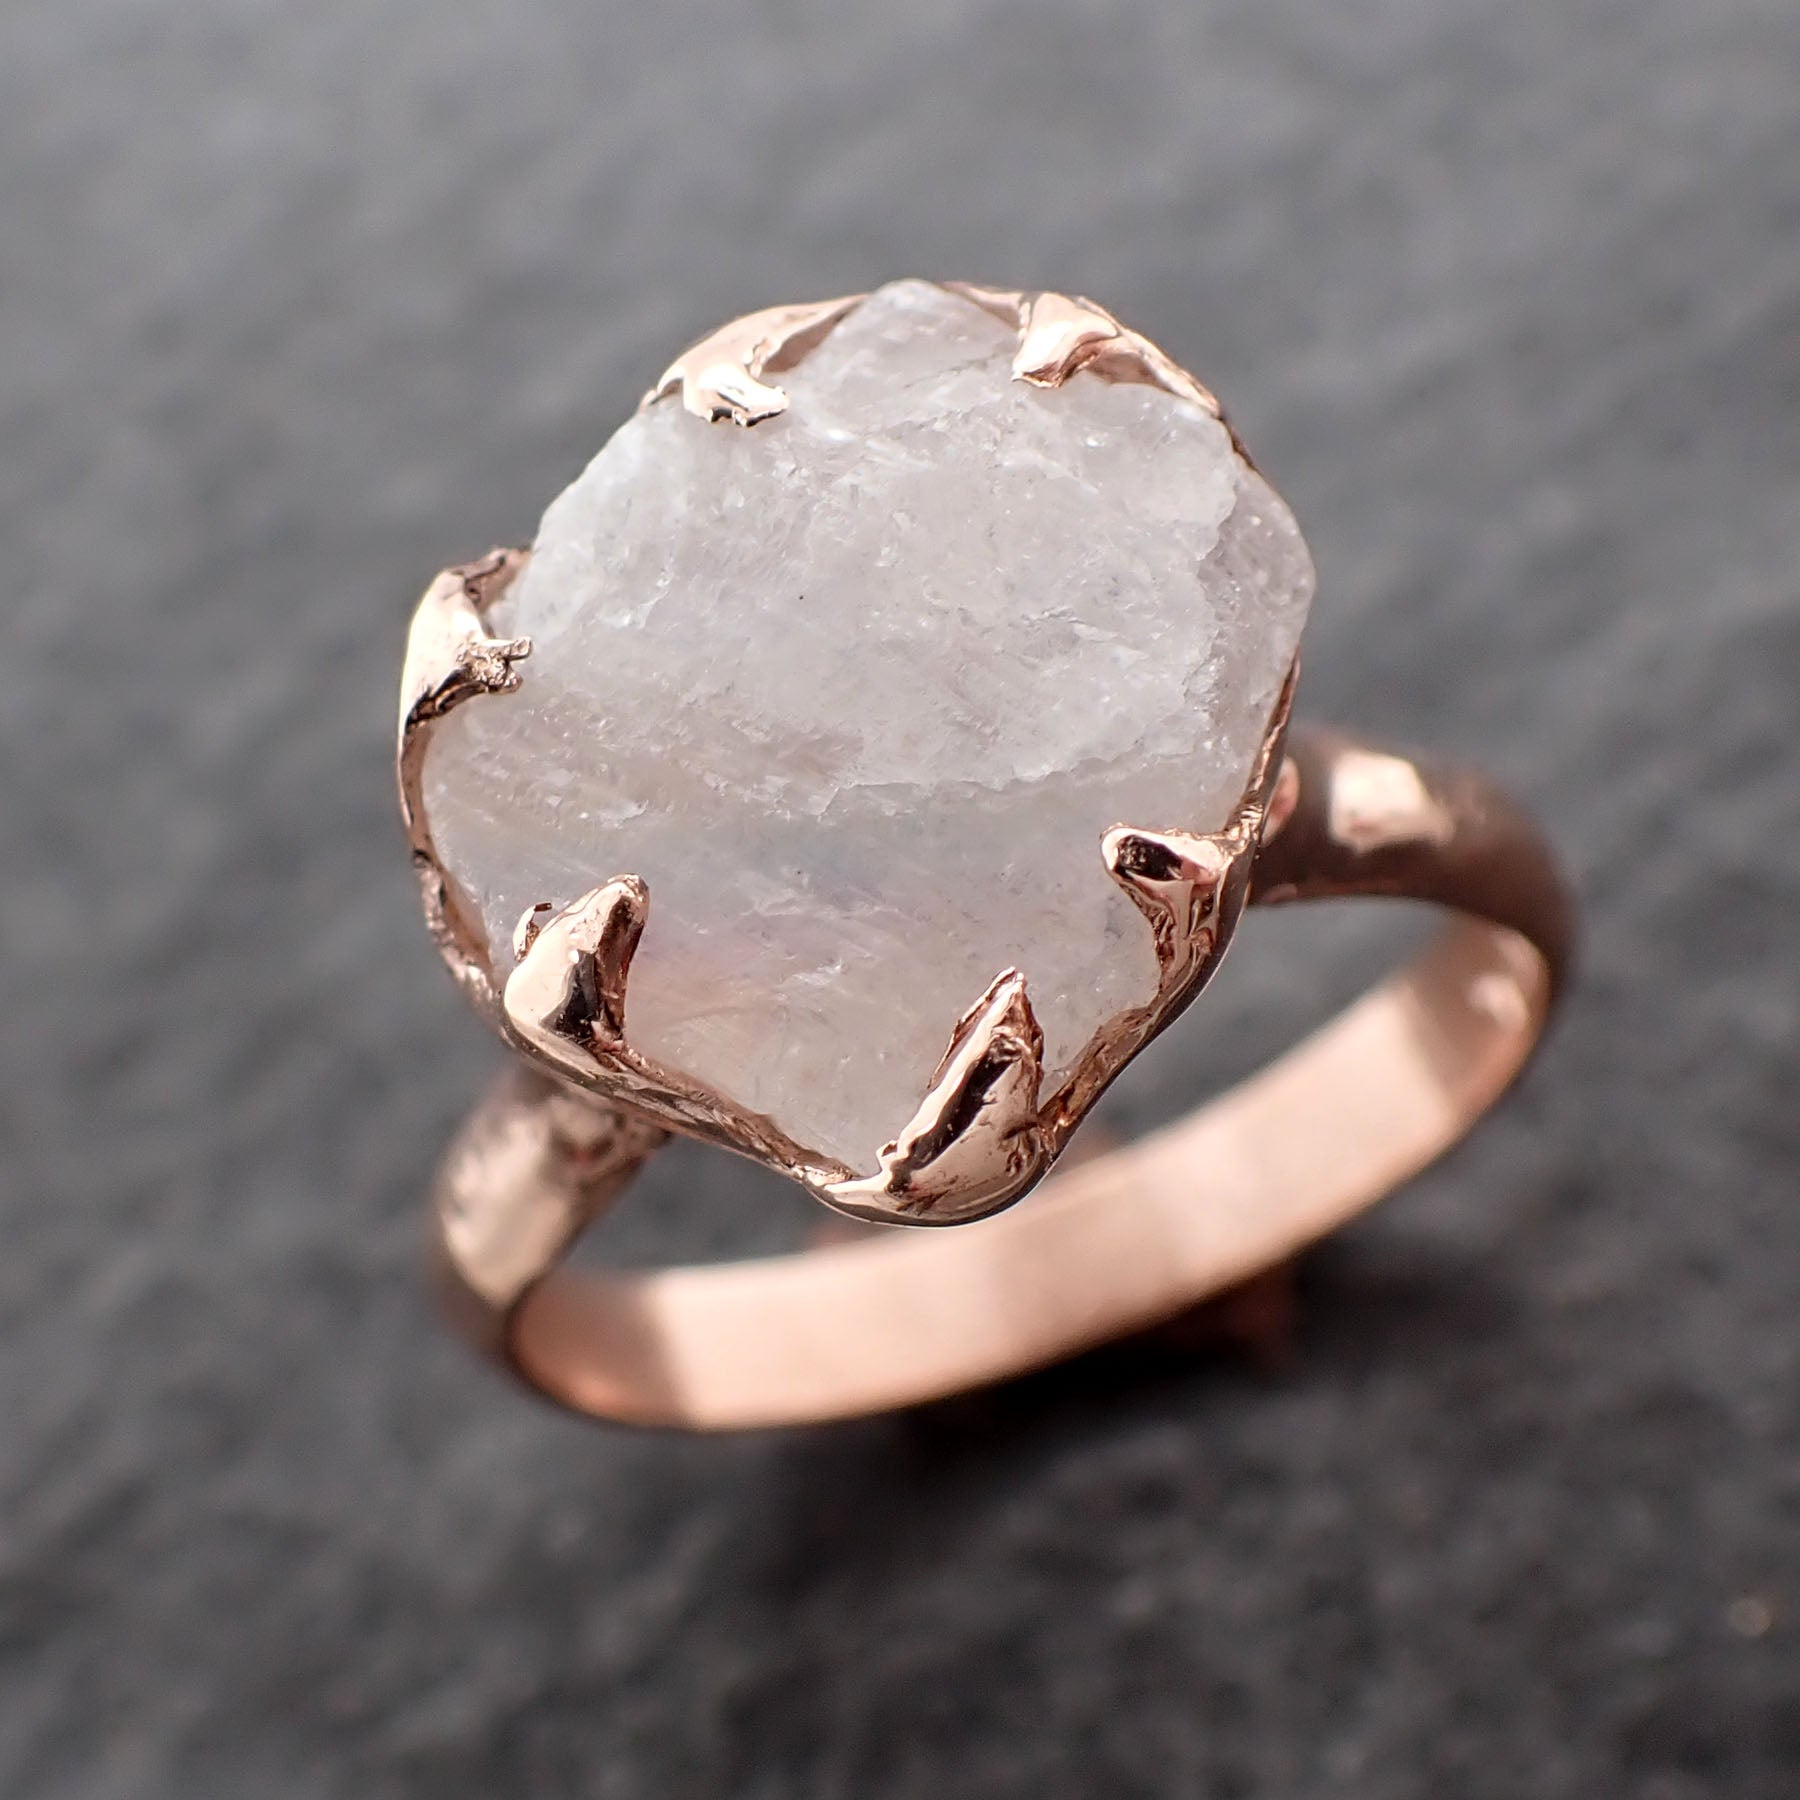 Rough Moonstone 14k Rose Gold Ring Gemstone Solitaire recycled statement cocktail statement 2545